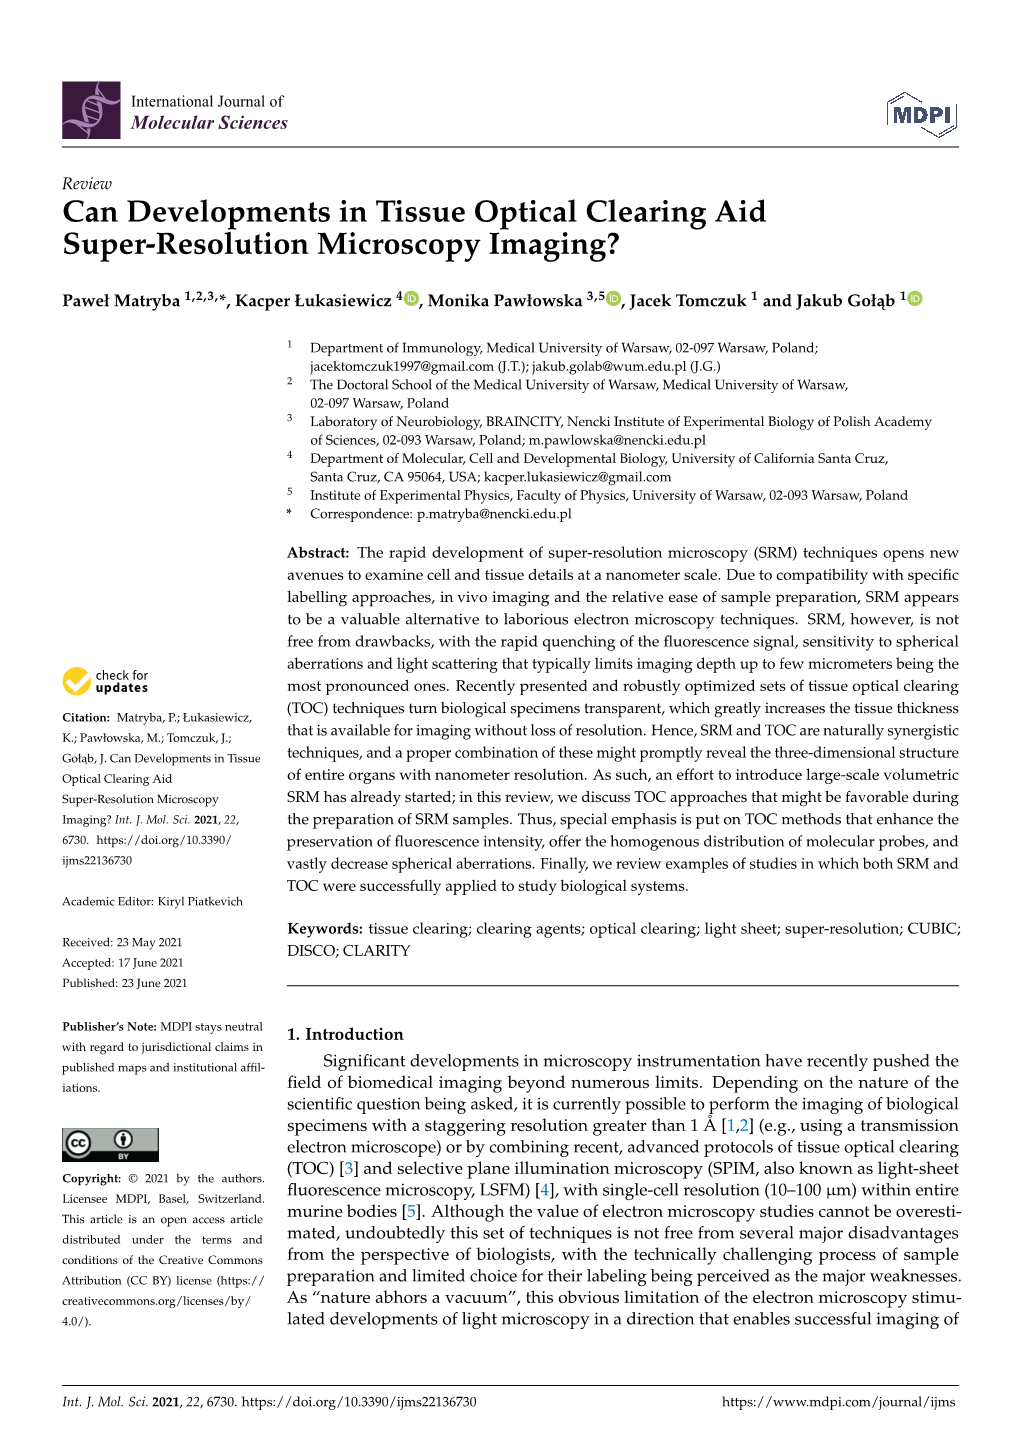 Can Developments in Tissue Optical Clearing Aid Super-Resolution Microscopy Imaging?